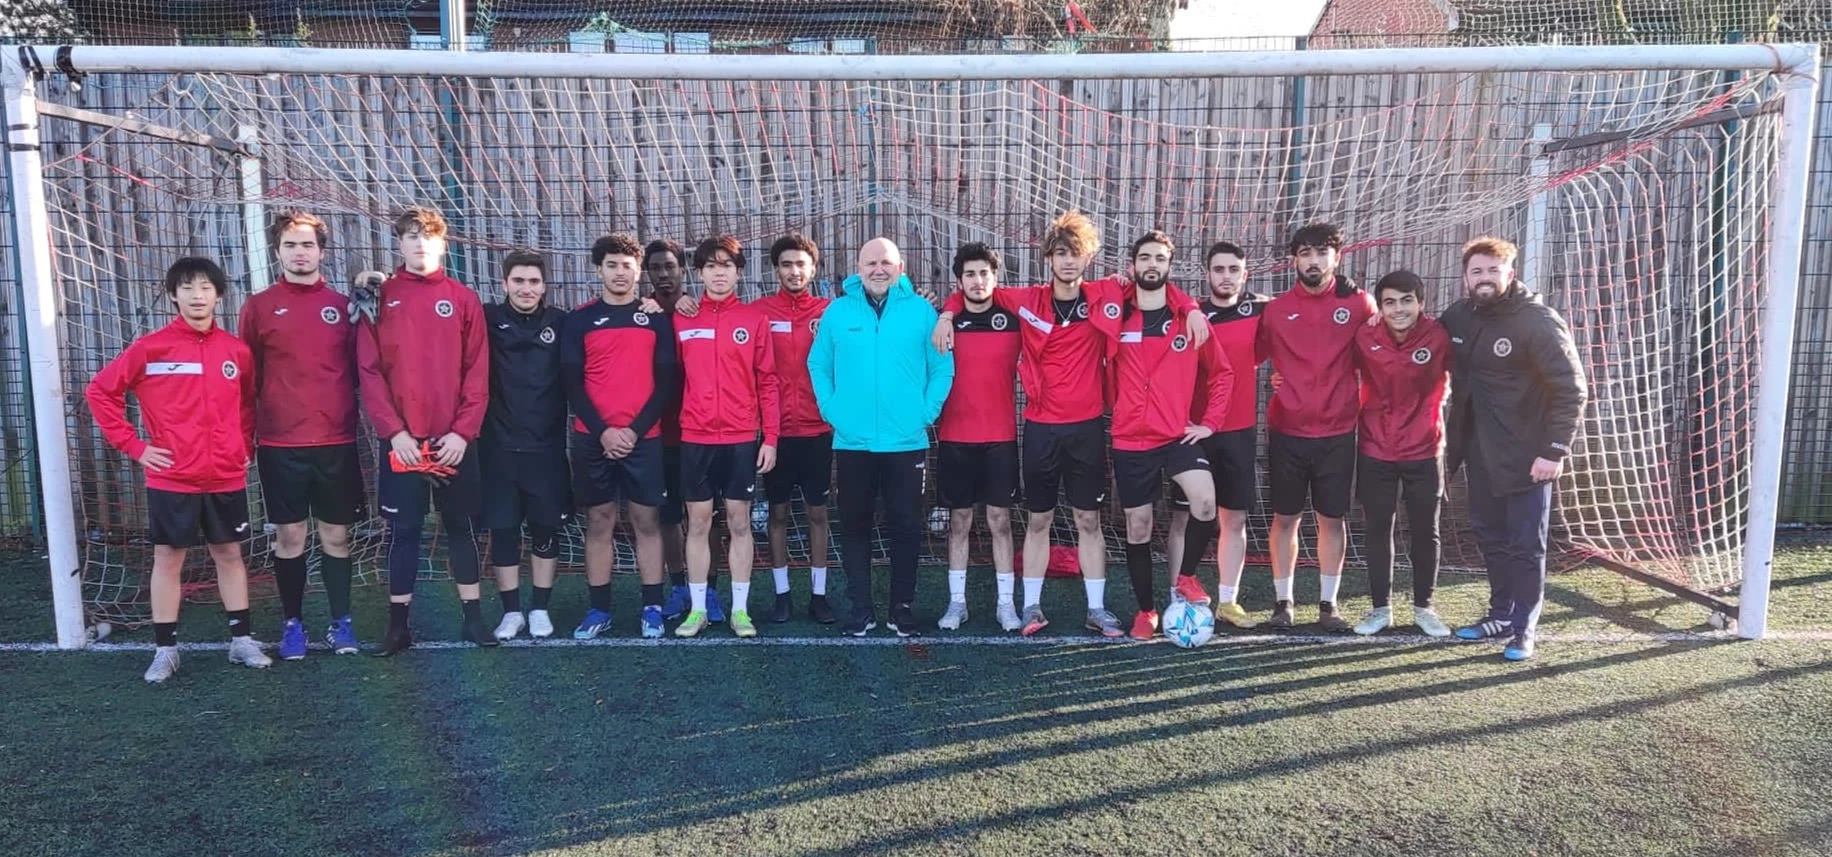 Abbey College Manchester Academic Studies with Football Training Team